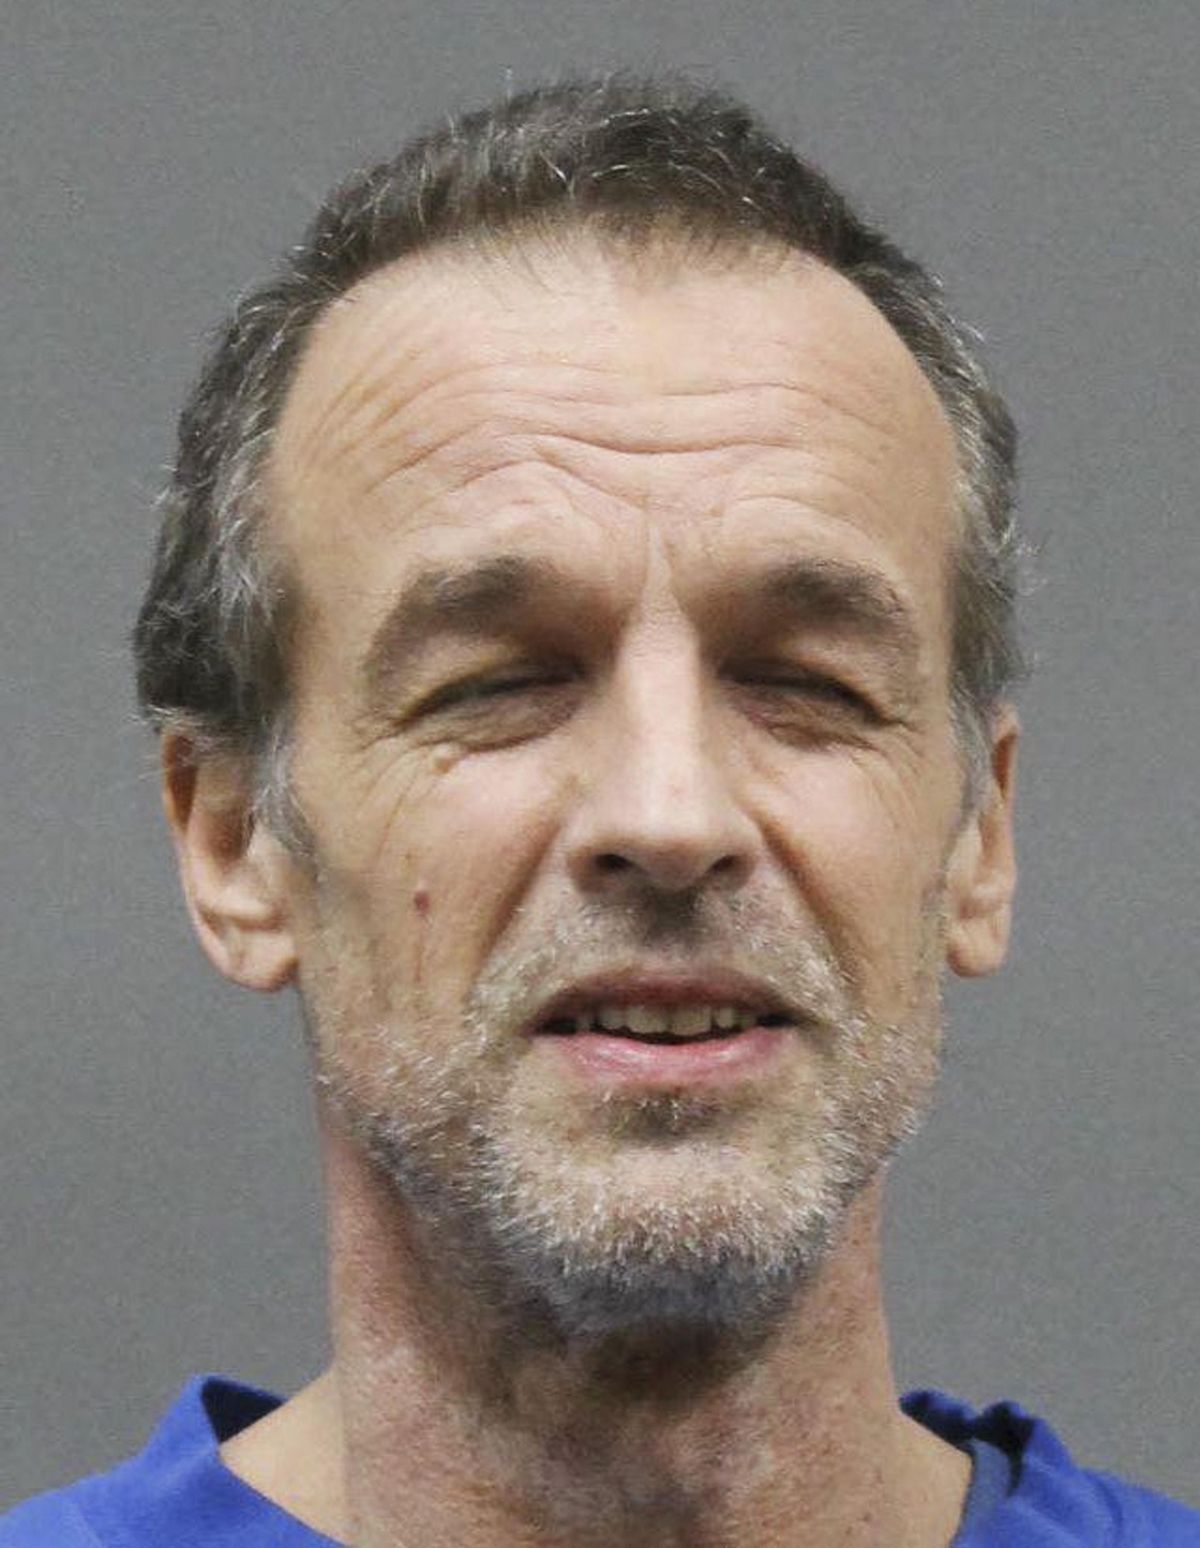 This June 18, 2016, booking photo provided by the Pine County Jail in Minnesota shows Victor Barnard. On Monday, June 20, 2016, a judge set bail for Barnard, a religious sect leader who is charged with sexually abusing girls at a secluded compound in rural Minnesota. (AP)